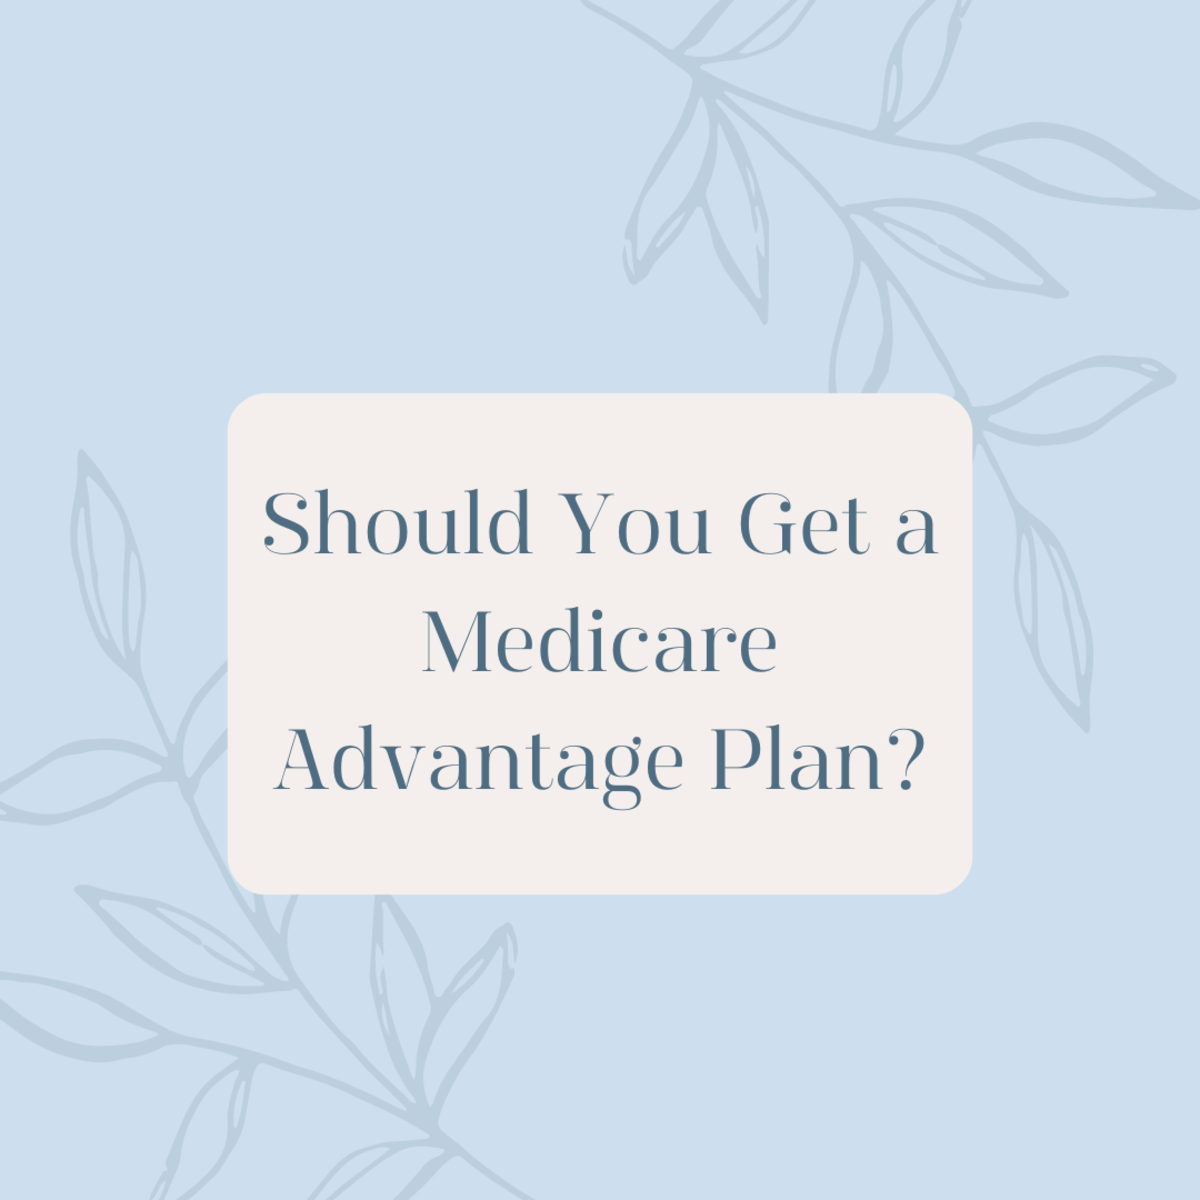 Health insurance companies don't tell you about the problems Medicare Advantage plans can cause. 